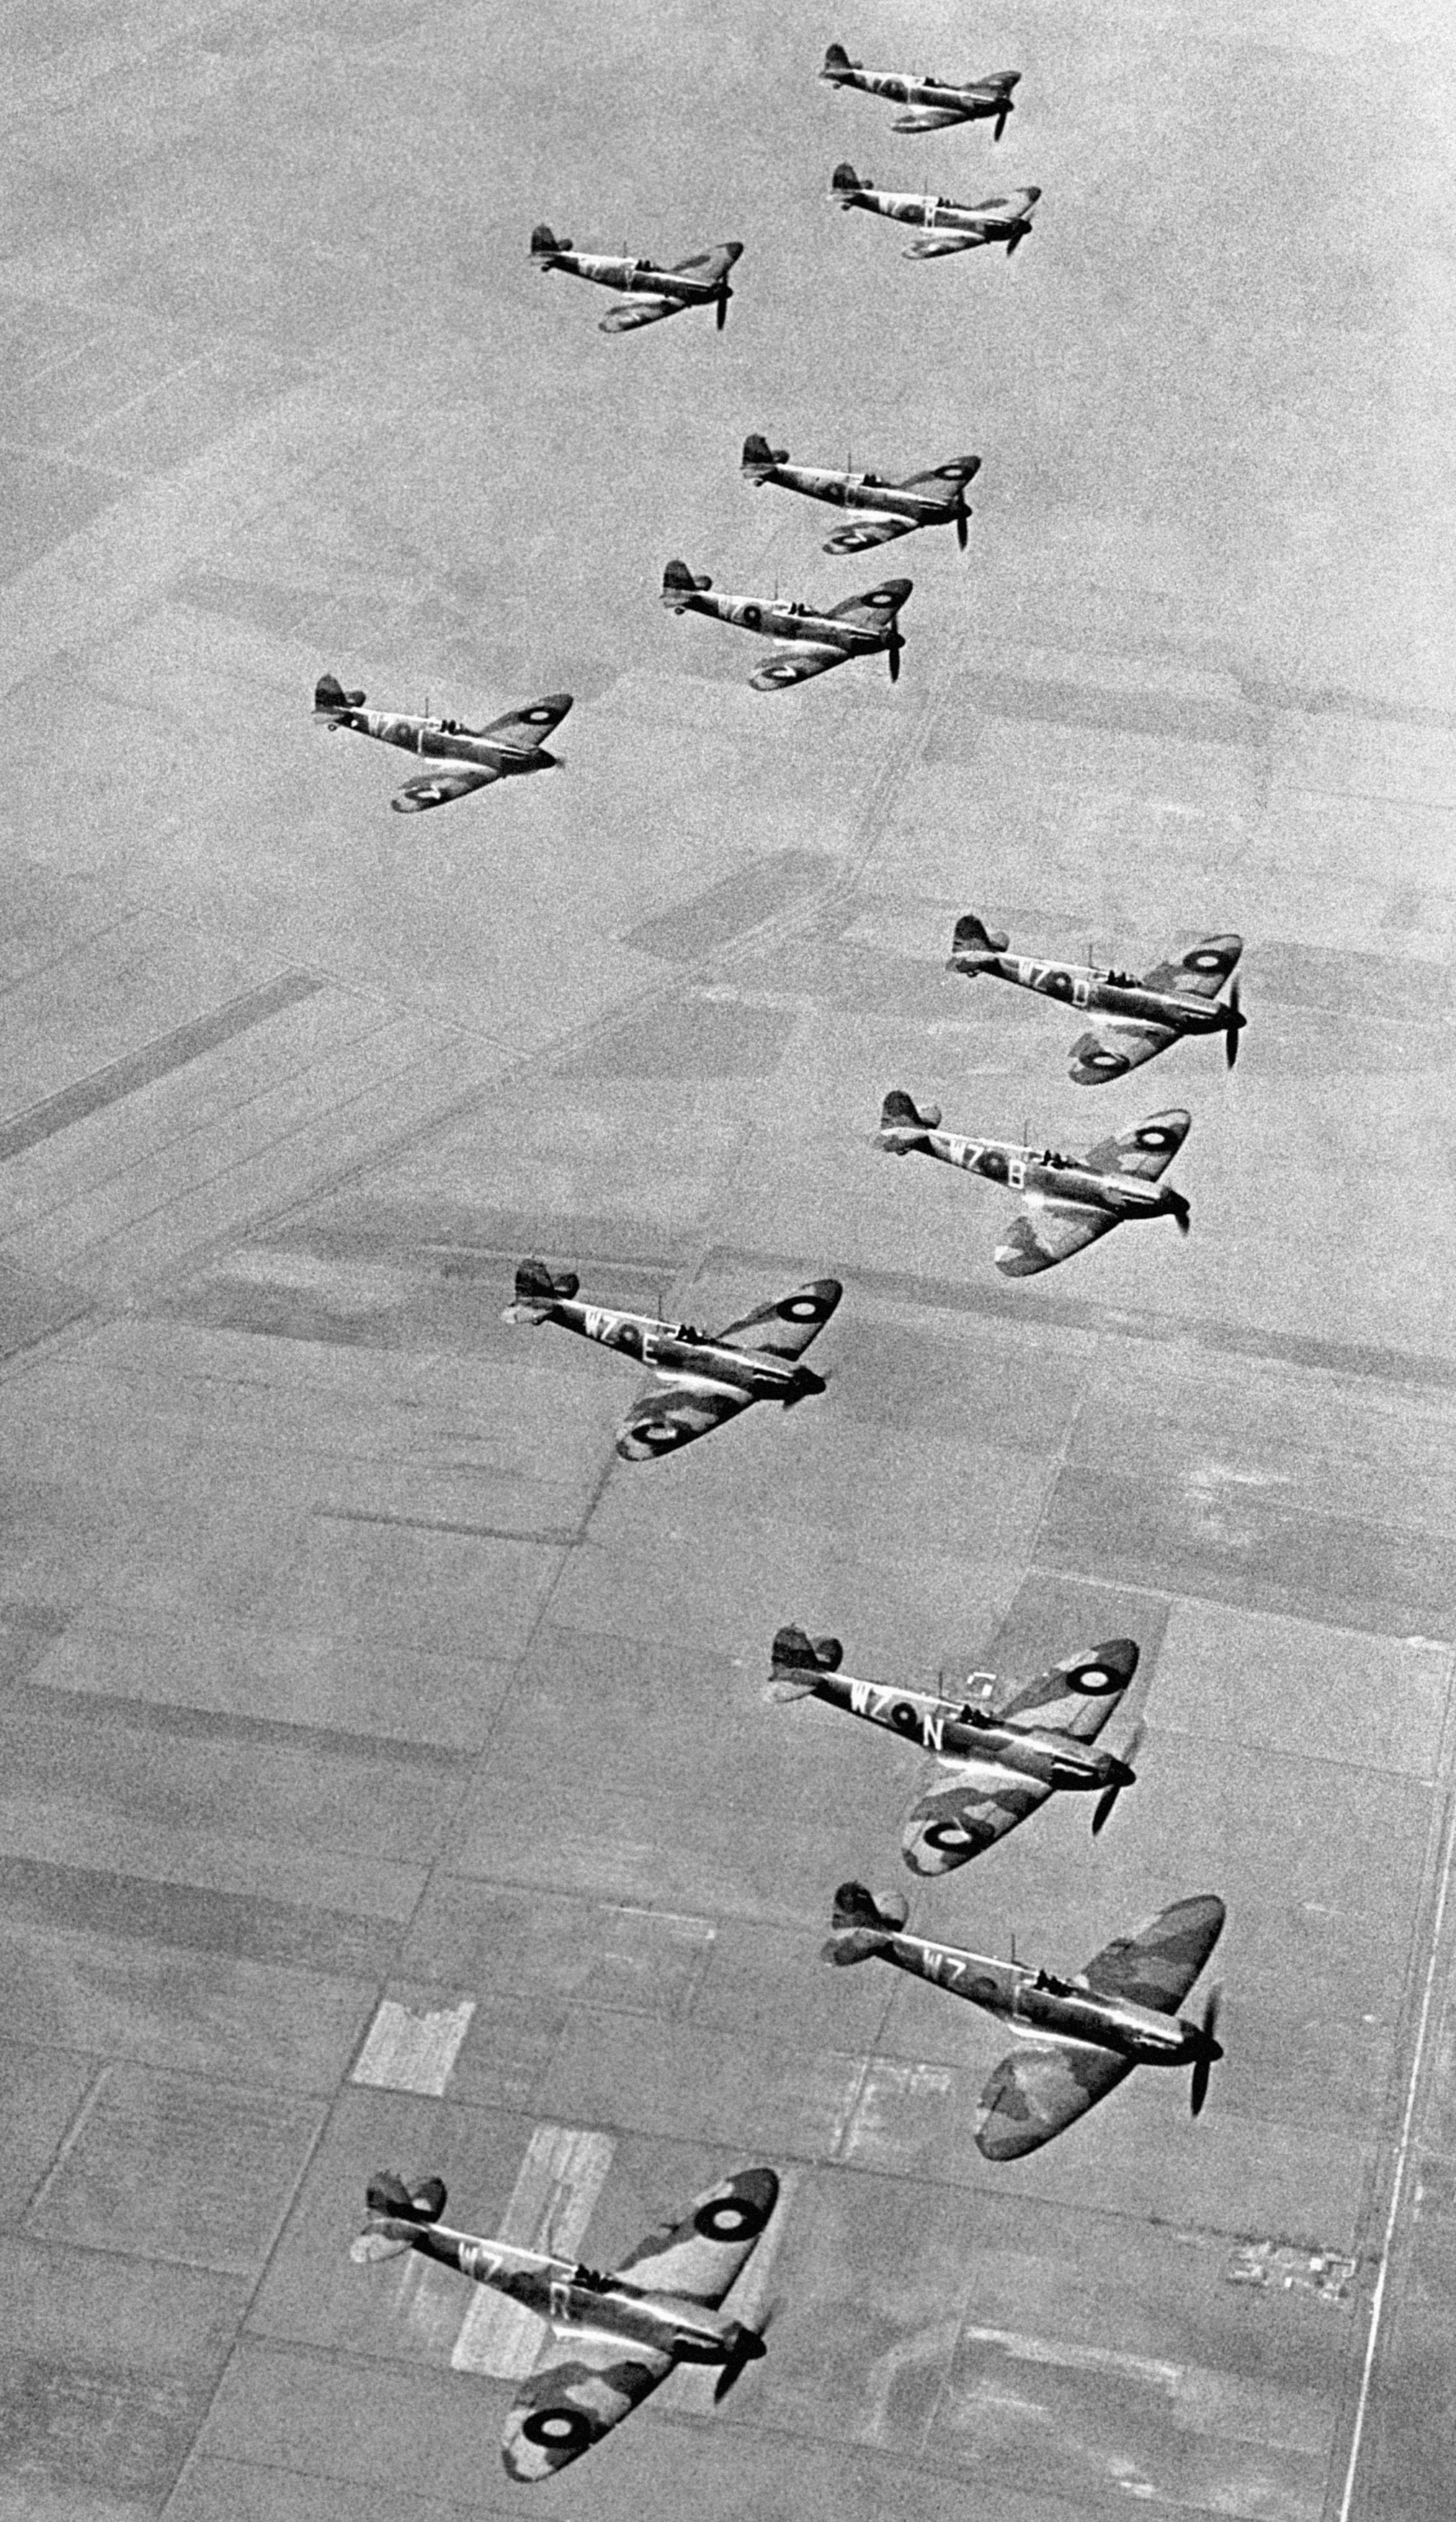 No19 Fighter Squadron, based at Duxford, Cambridgeshire, flying their two blade propeller Supermarine Spitfire aircraft in formation in 1939 (PA)